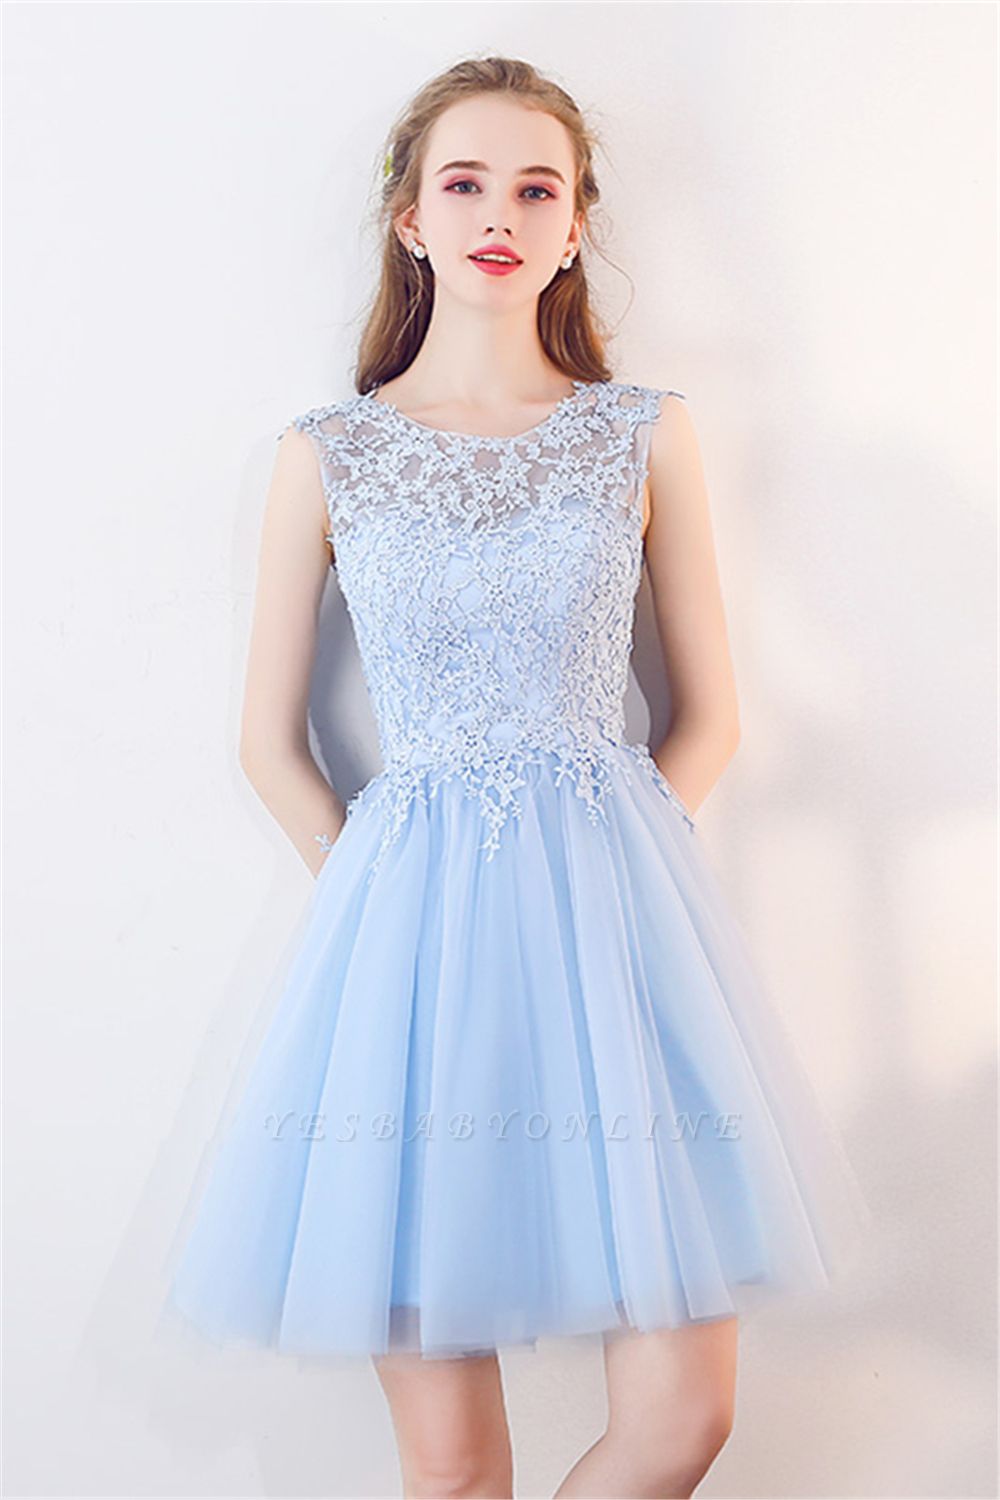 Baby-Blue Lace Short Appliques Sleeveless Homecoming Dresses ...